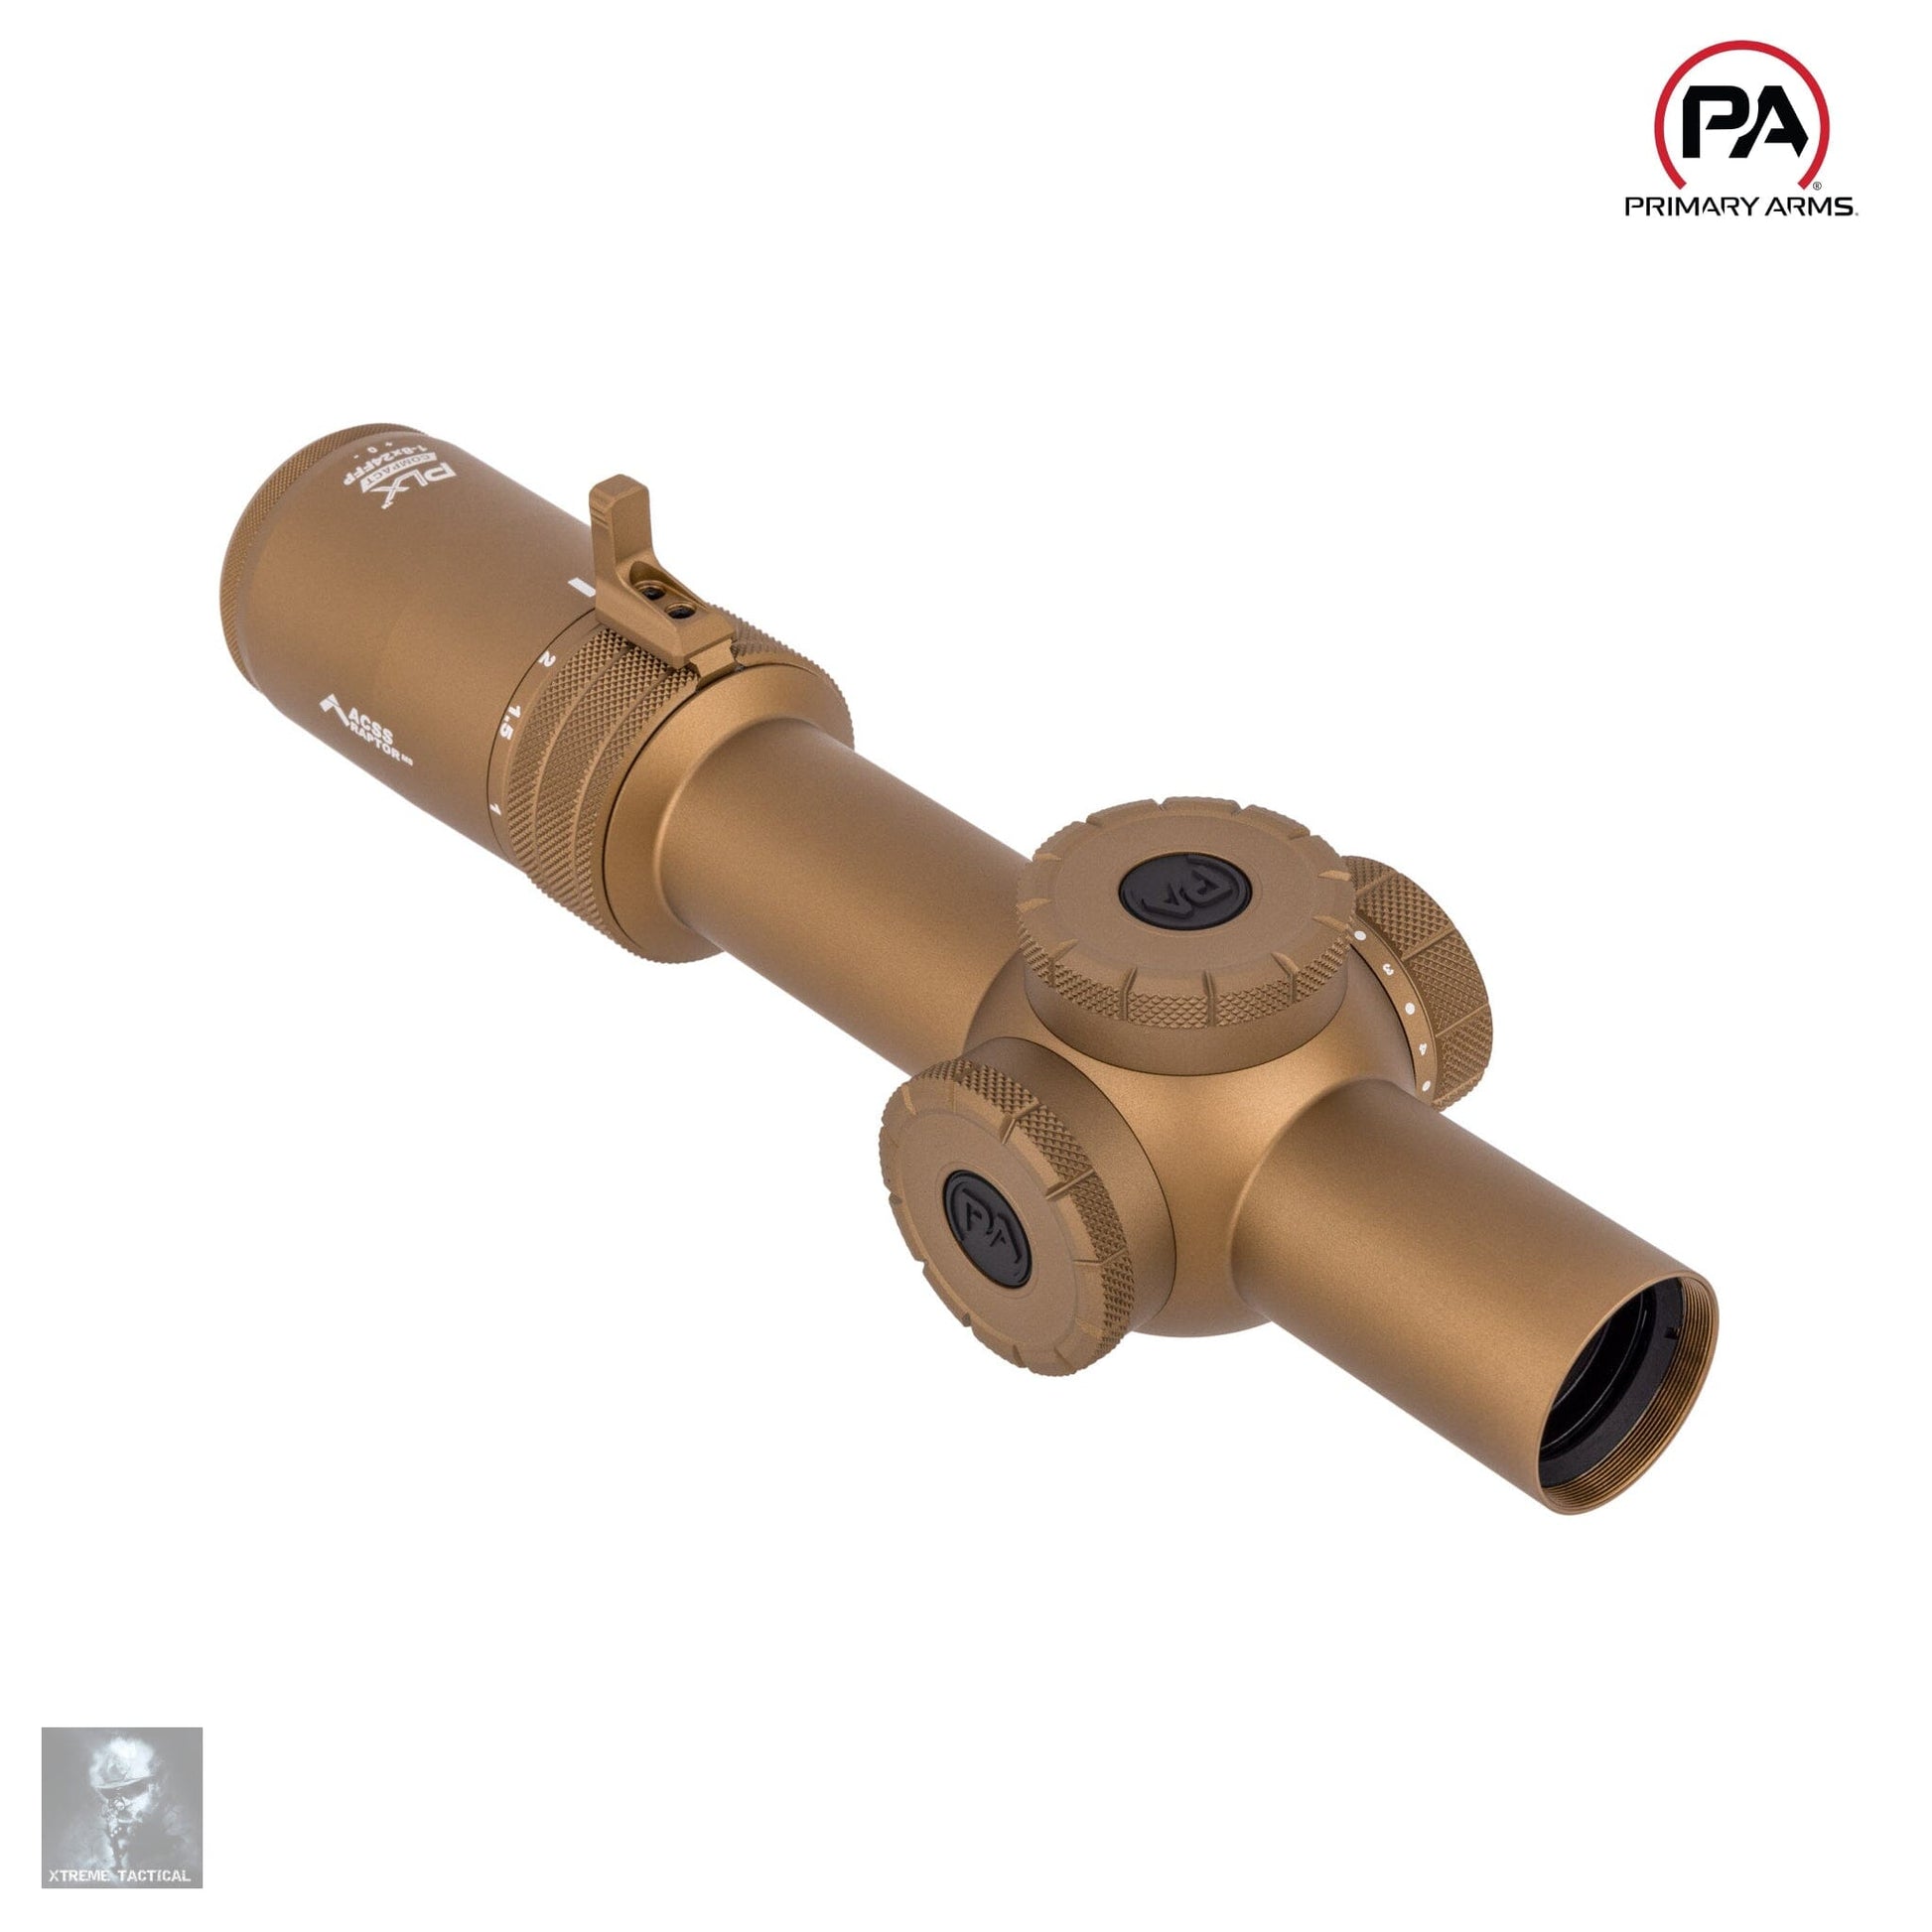 Primary Arms Compact PLxC 1-8x24 FFP Rifle Scope - ACSS Griffin MIL M8 Reticle - FDE LPVO Rifle Scope Primary Arms 